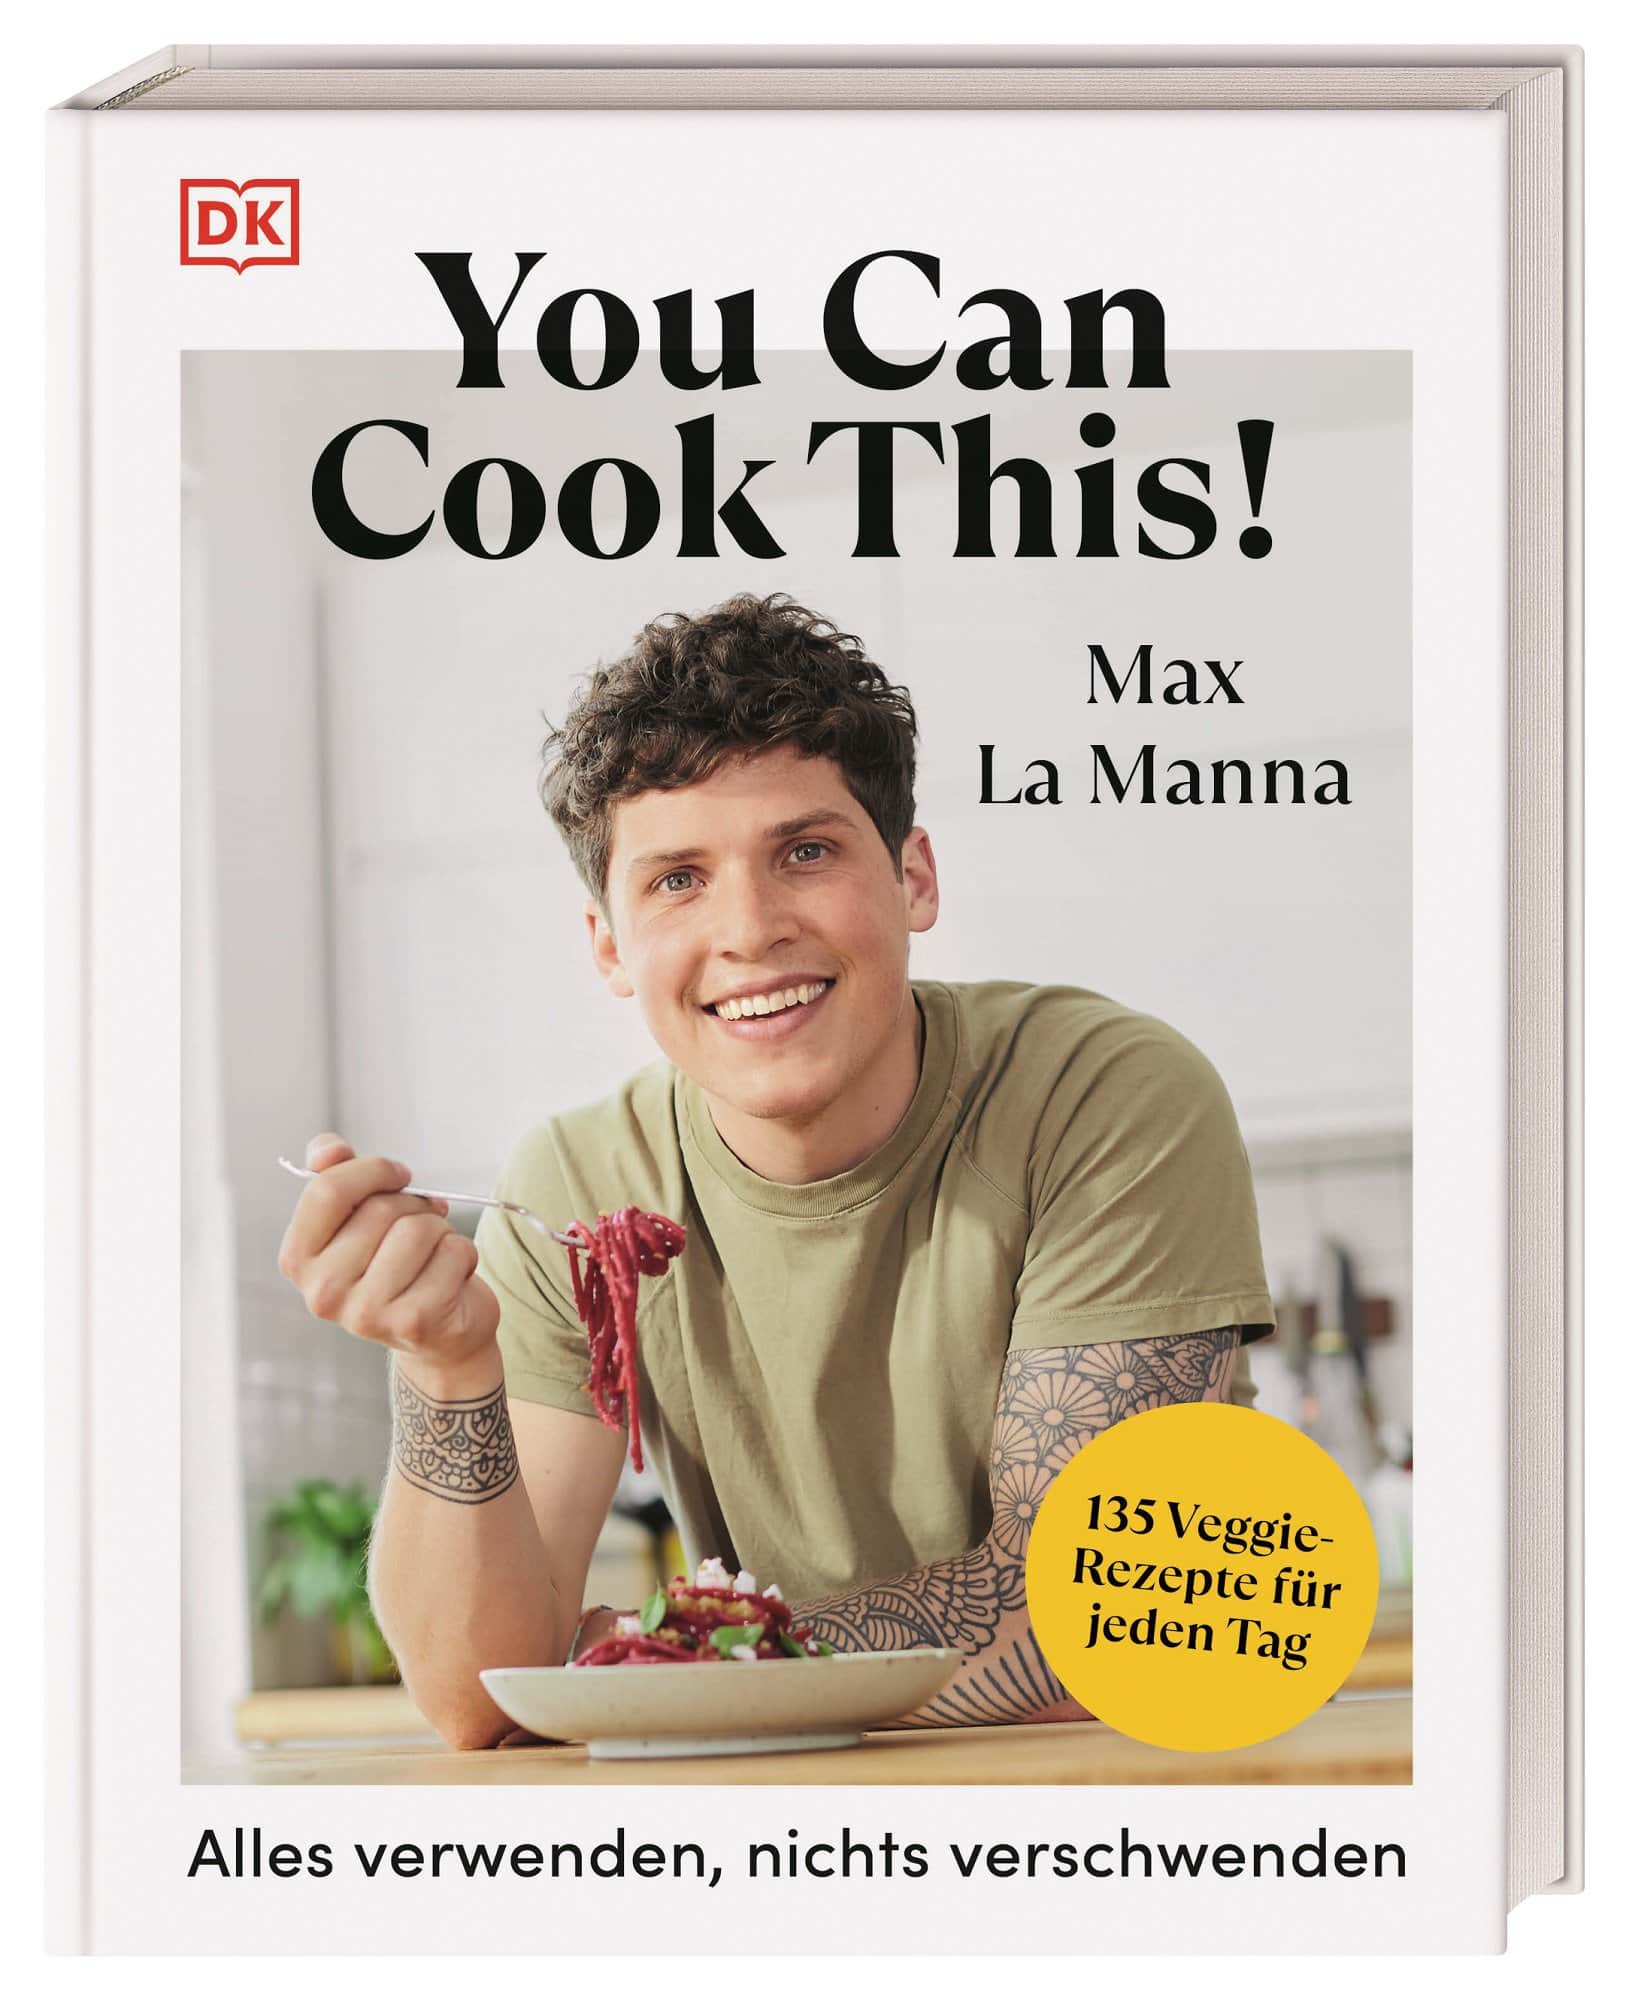 Buchcover "You Can Cook This"